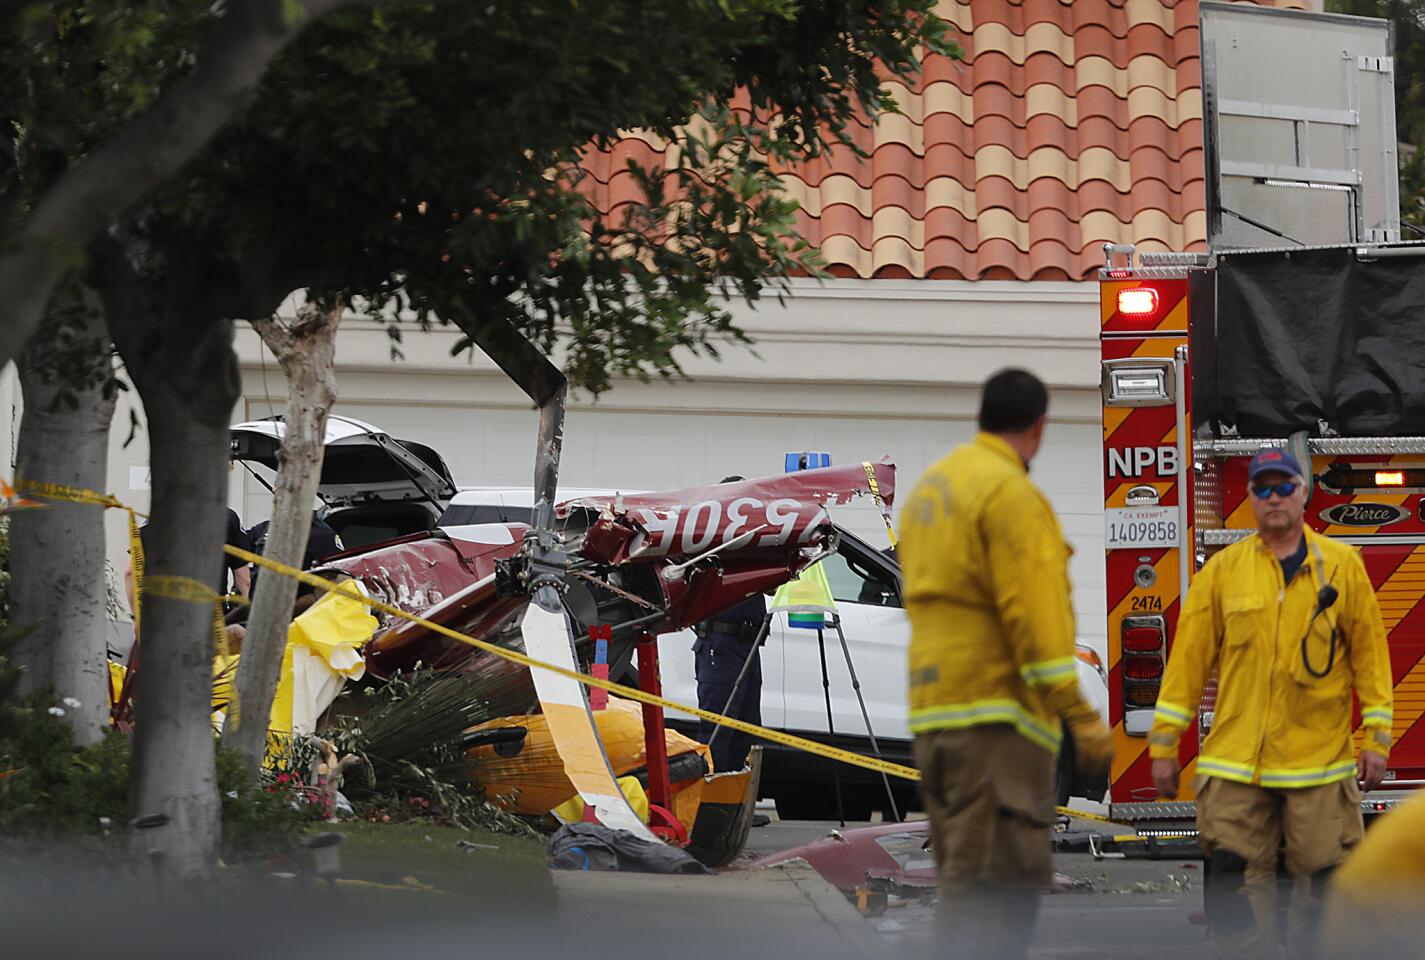 Fire crews work the scene of a helicopter crash that killed three people and injured two others on Shearwater Place in the Bayview Terrace community in Newport Beach.